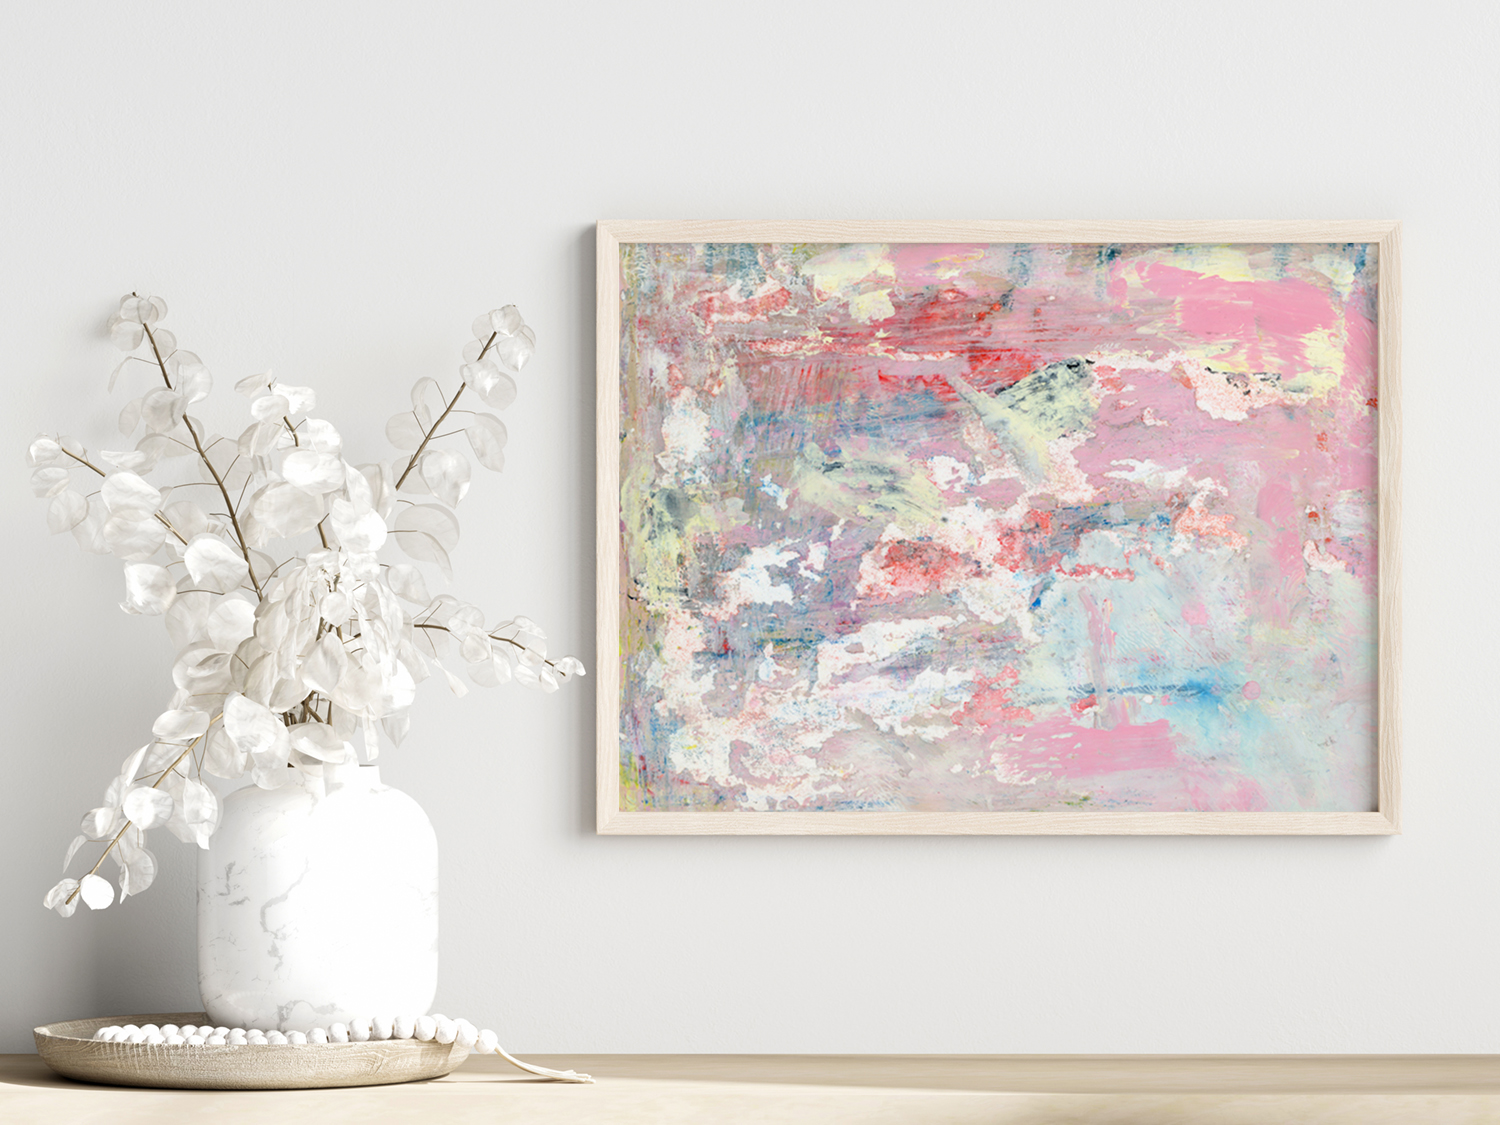 Katie Jeanne Wood - Leading Me Out farmhouse style pastel abstract painting